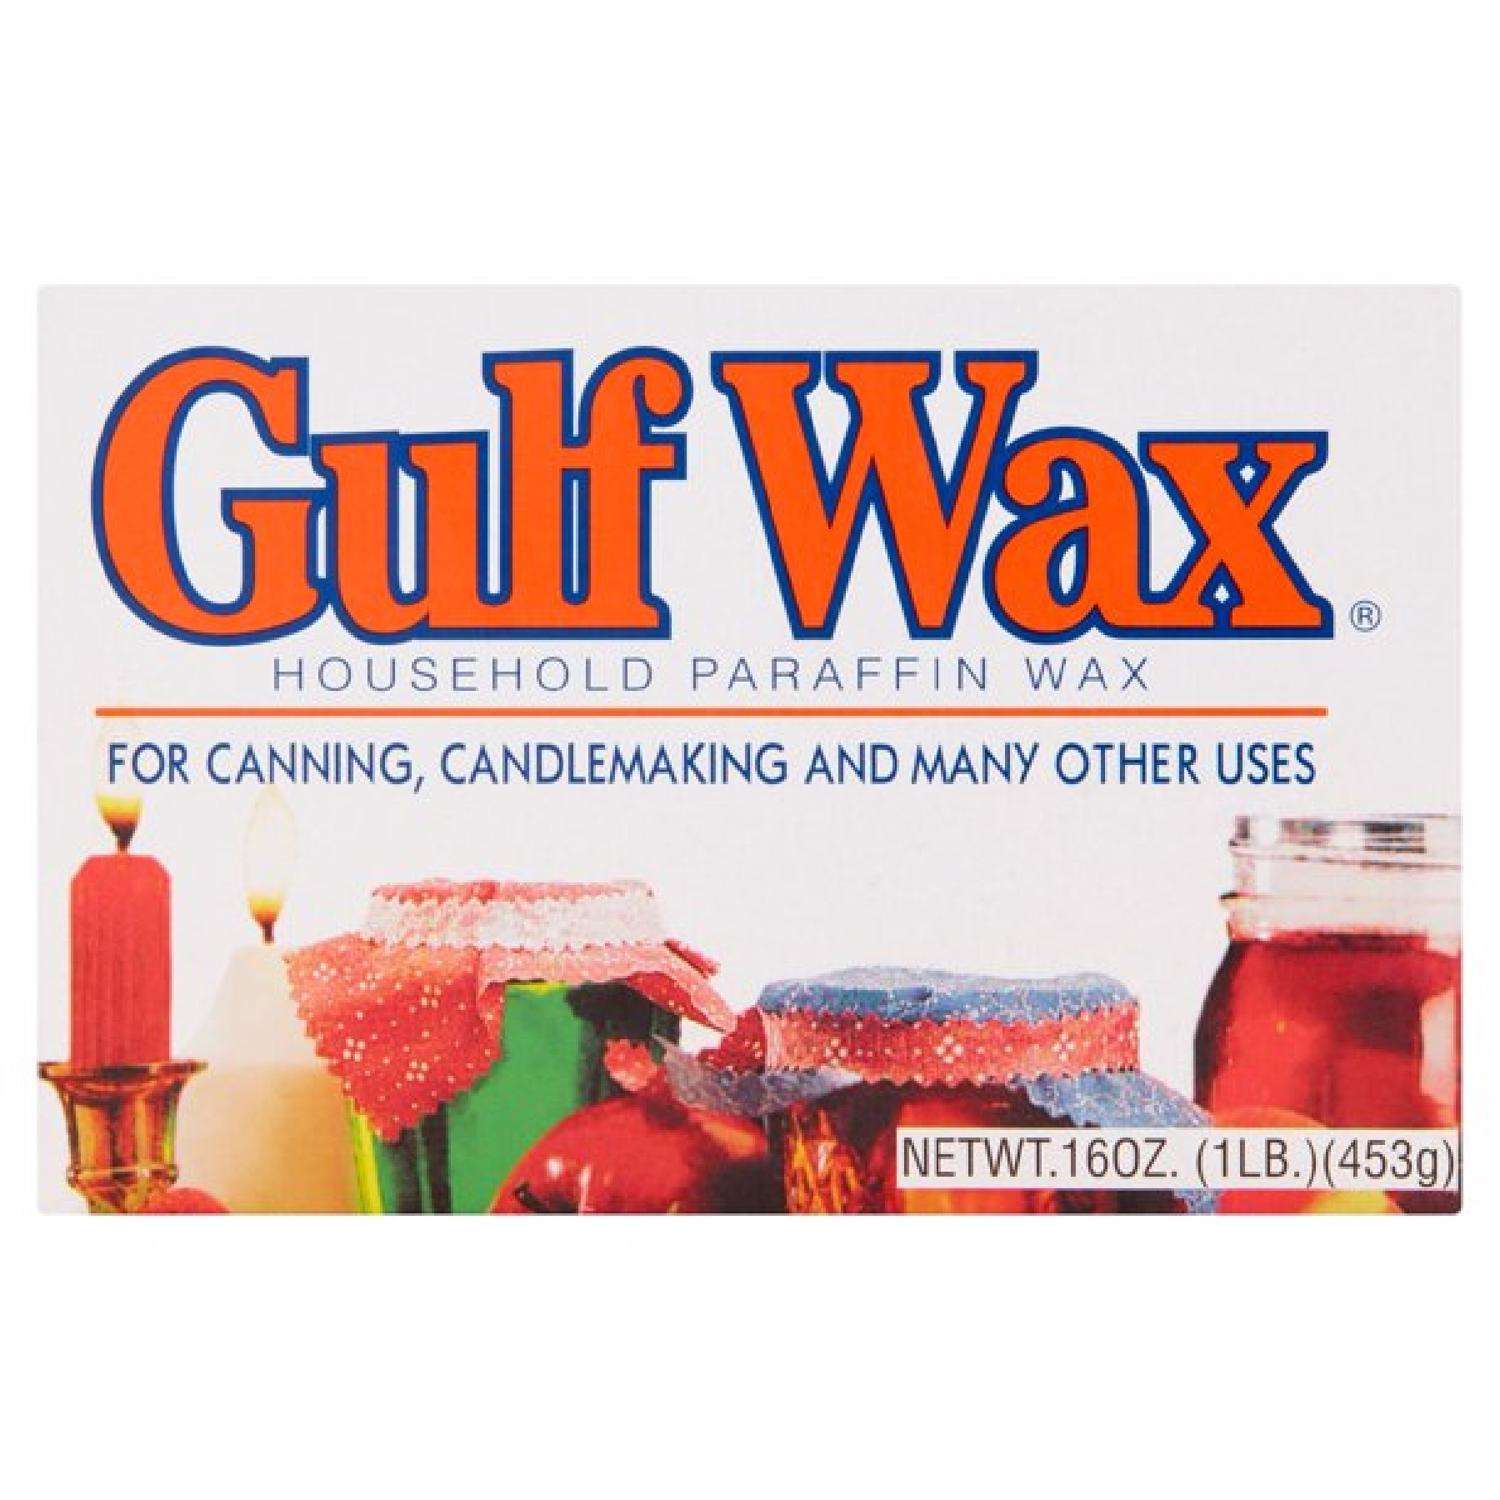 Candle Making Kit, Soy Wax, 16 Color Dyes, Thermometer, Tins, Wicks,  Melting Pot - Coupon Codes, Promo Codes, Daily Deals, Save Money Today